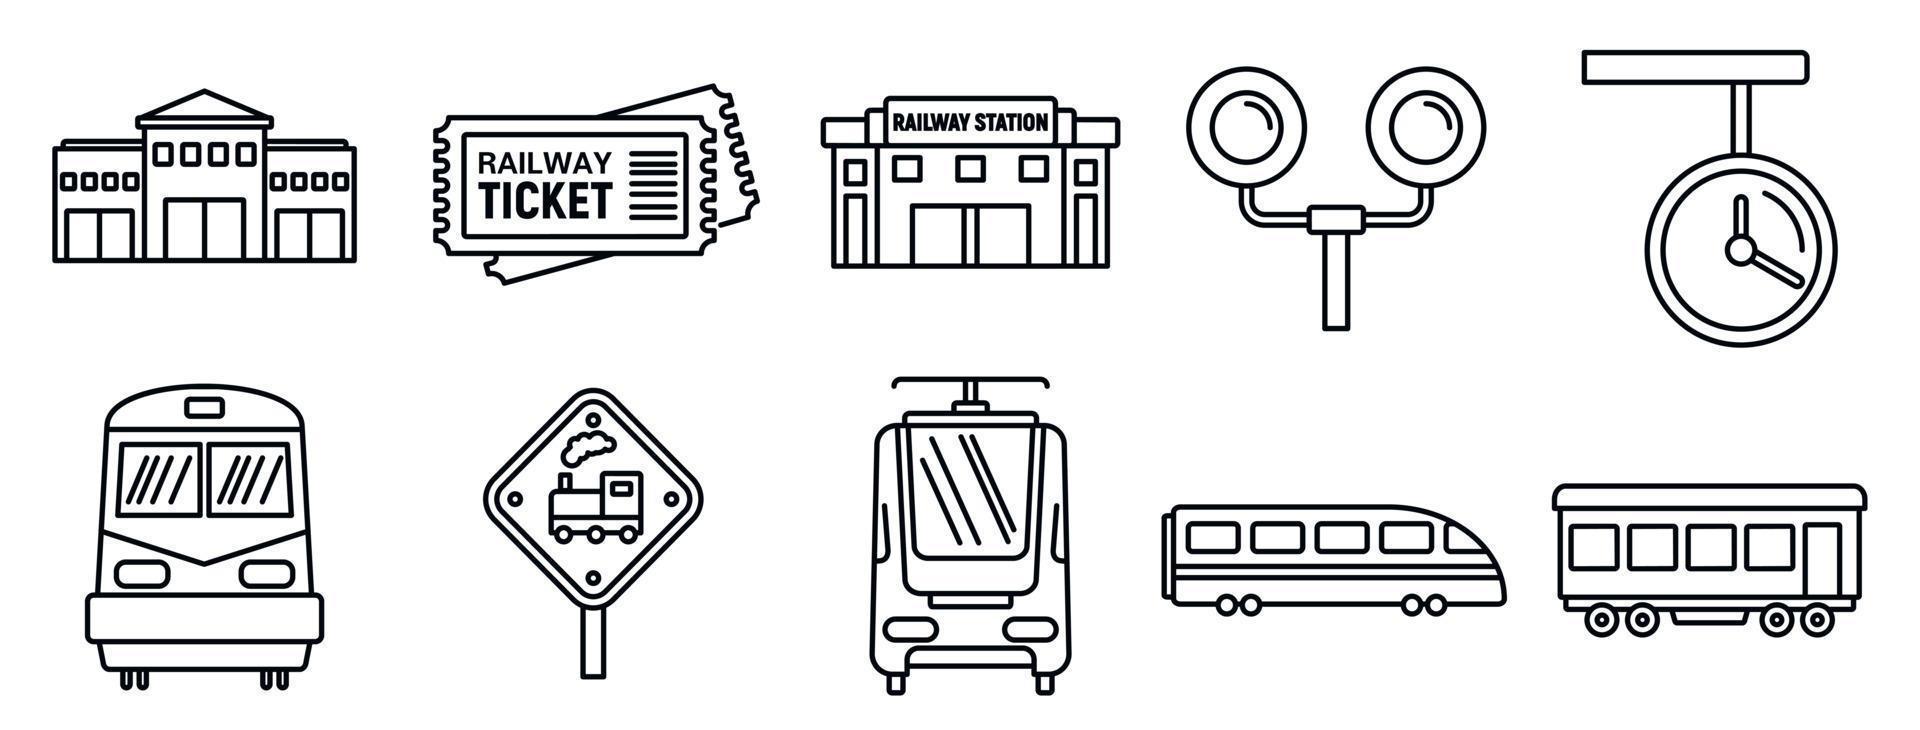 Railway train station icons set, outline style vector